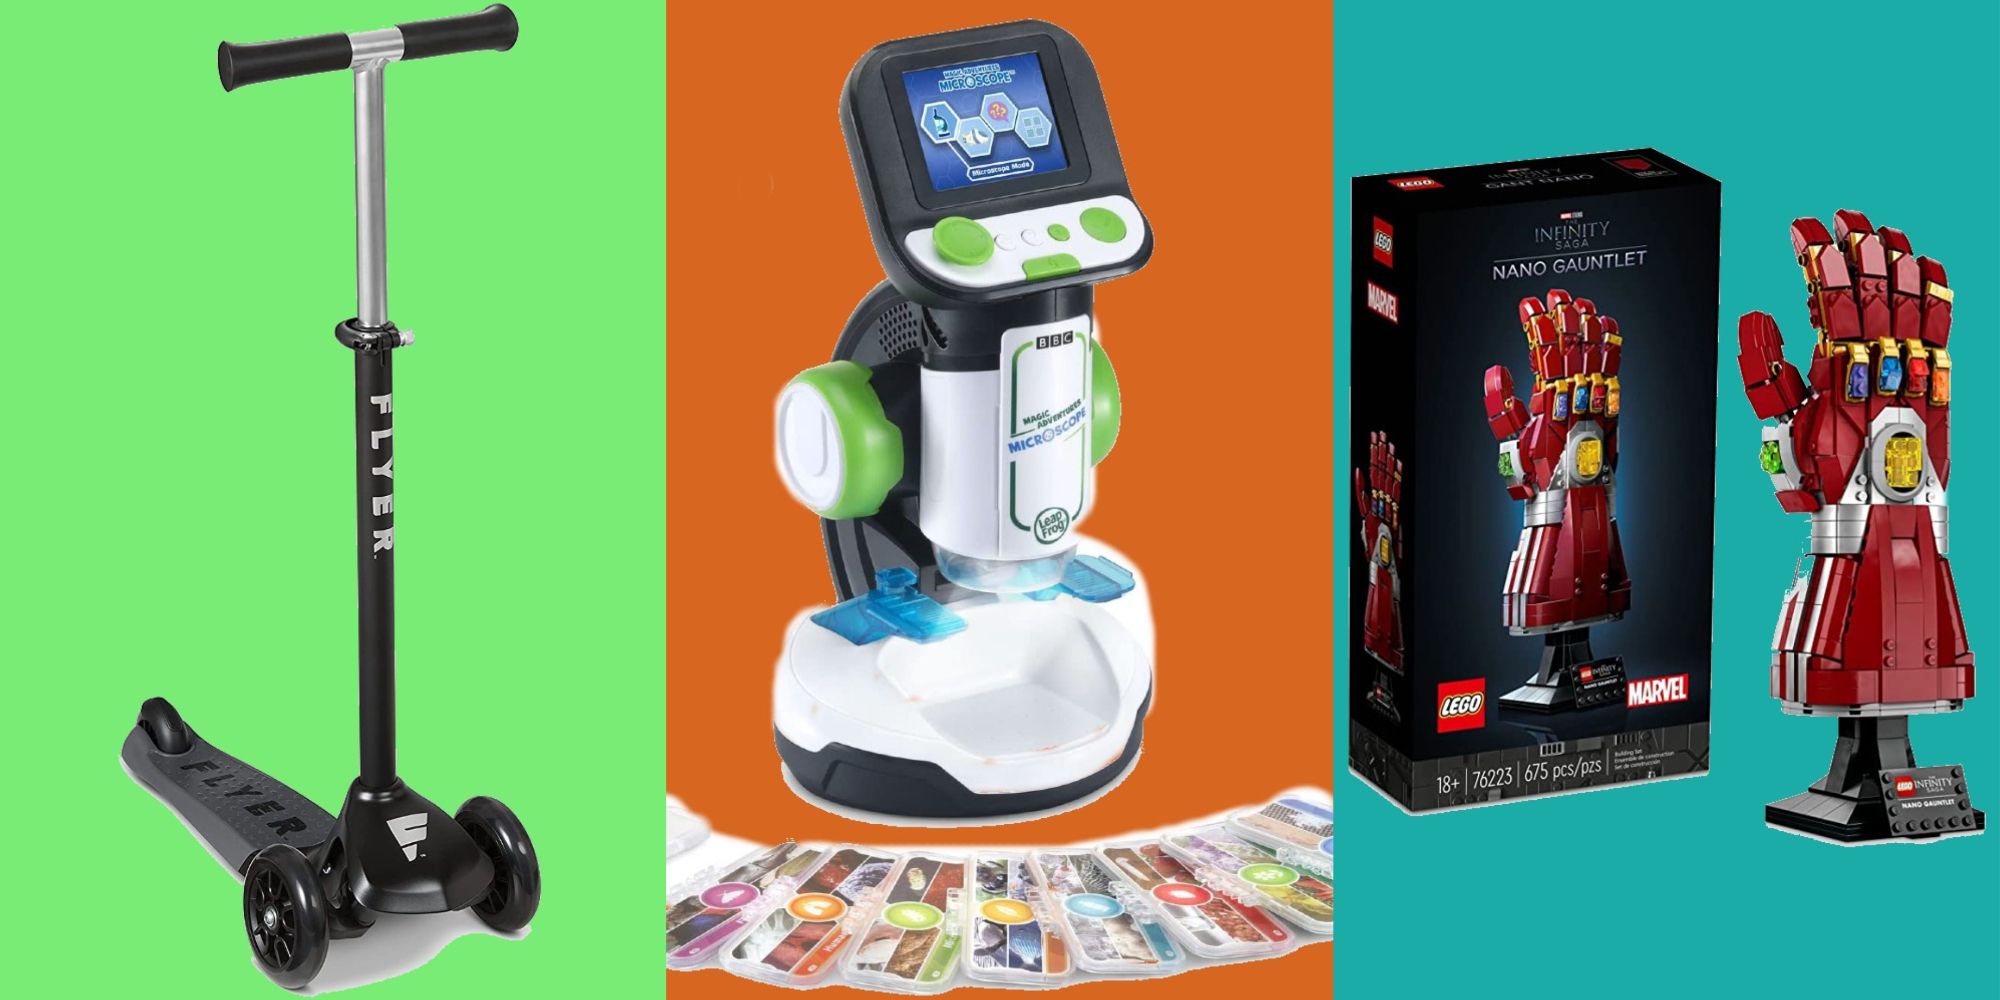 Split image of Flyer Glider Pro scooter, LeapFrog Microscope, and LEGO nano gauntlet set, all from Amazon